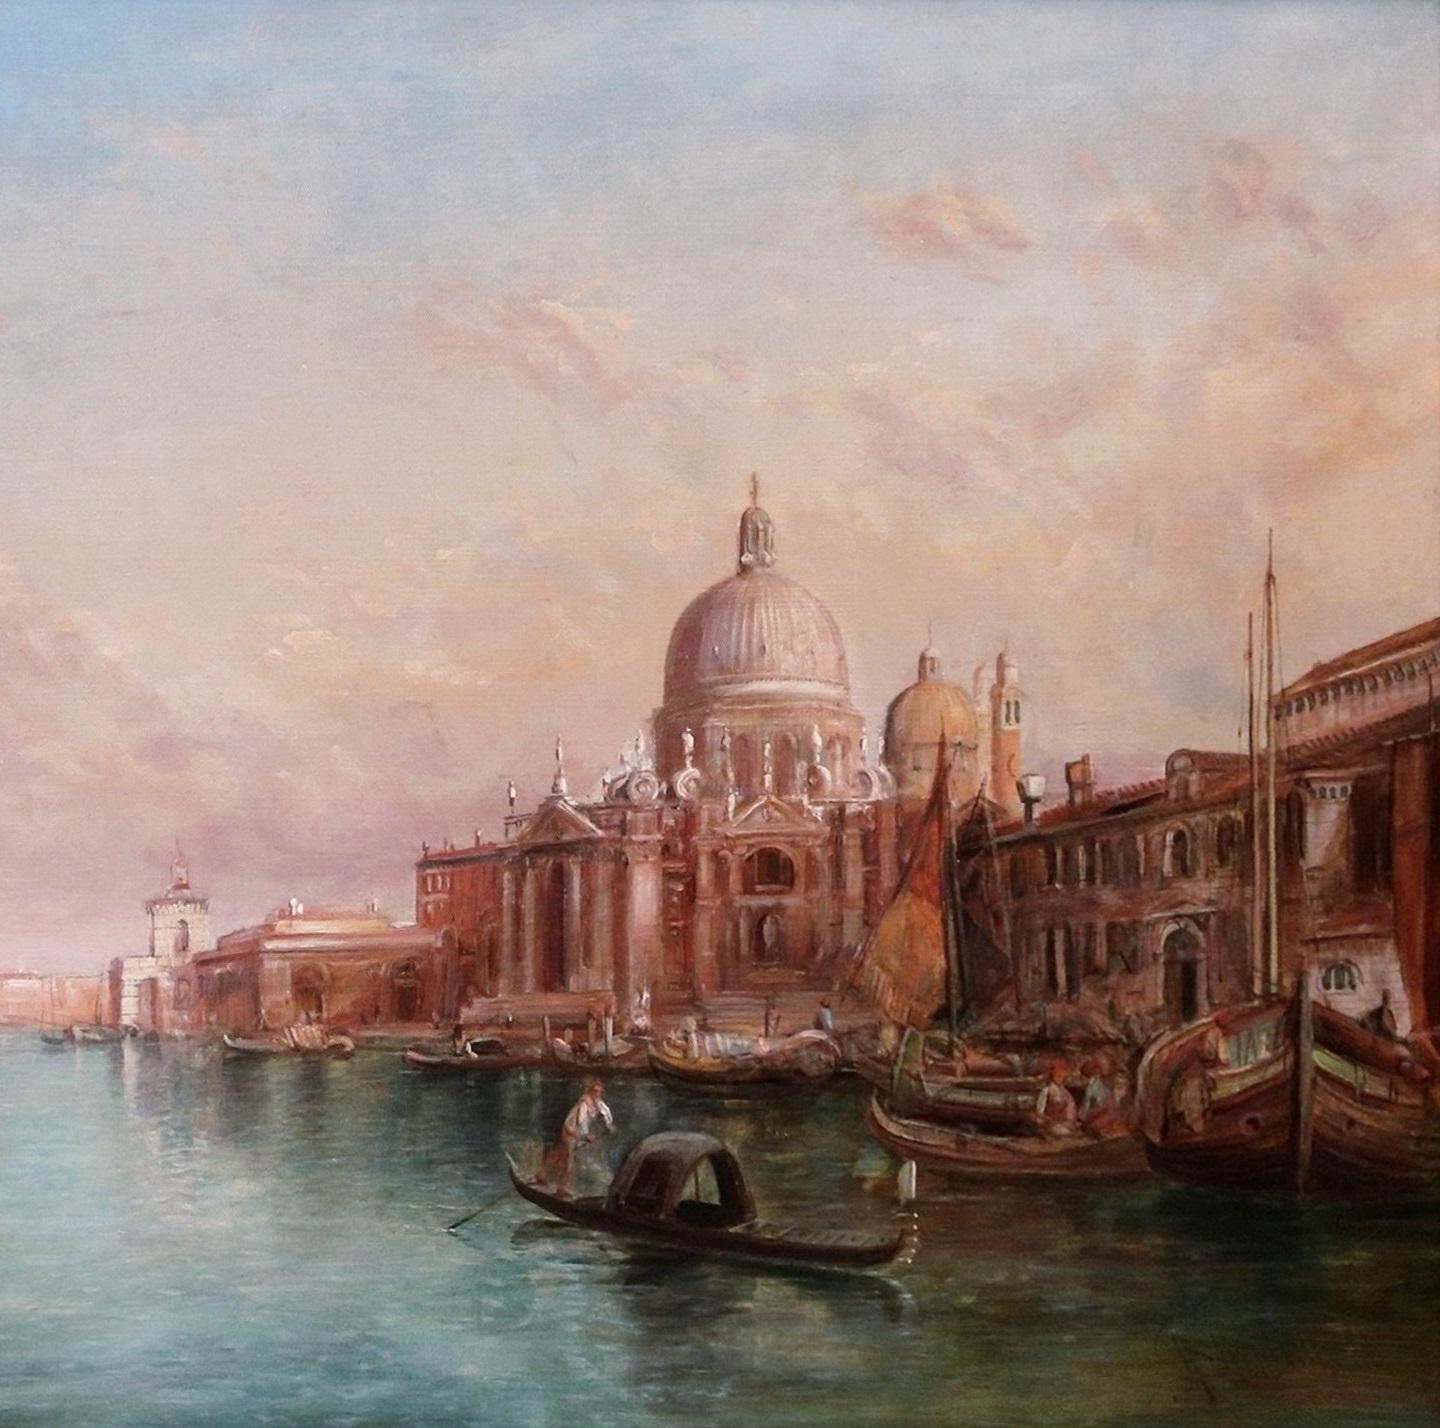 ‘Santa Maria della Salute, Venice’ by Alfred Pollentine (1836-1890). The painting is signed by the artist and dated 1871.

All our paintings are offered in the finest condition they can be for their age having been newly professionally cleaned,